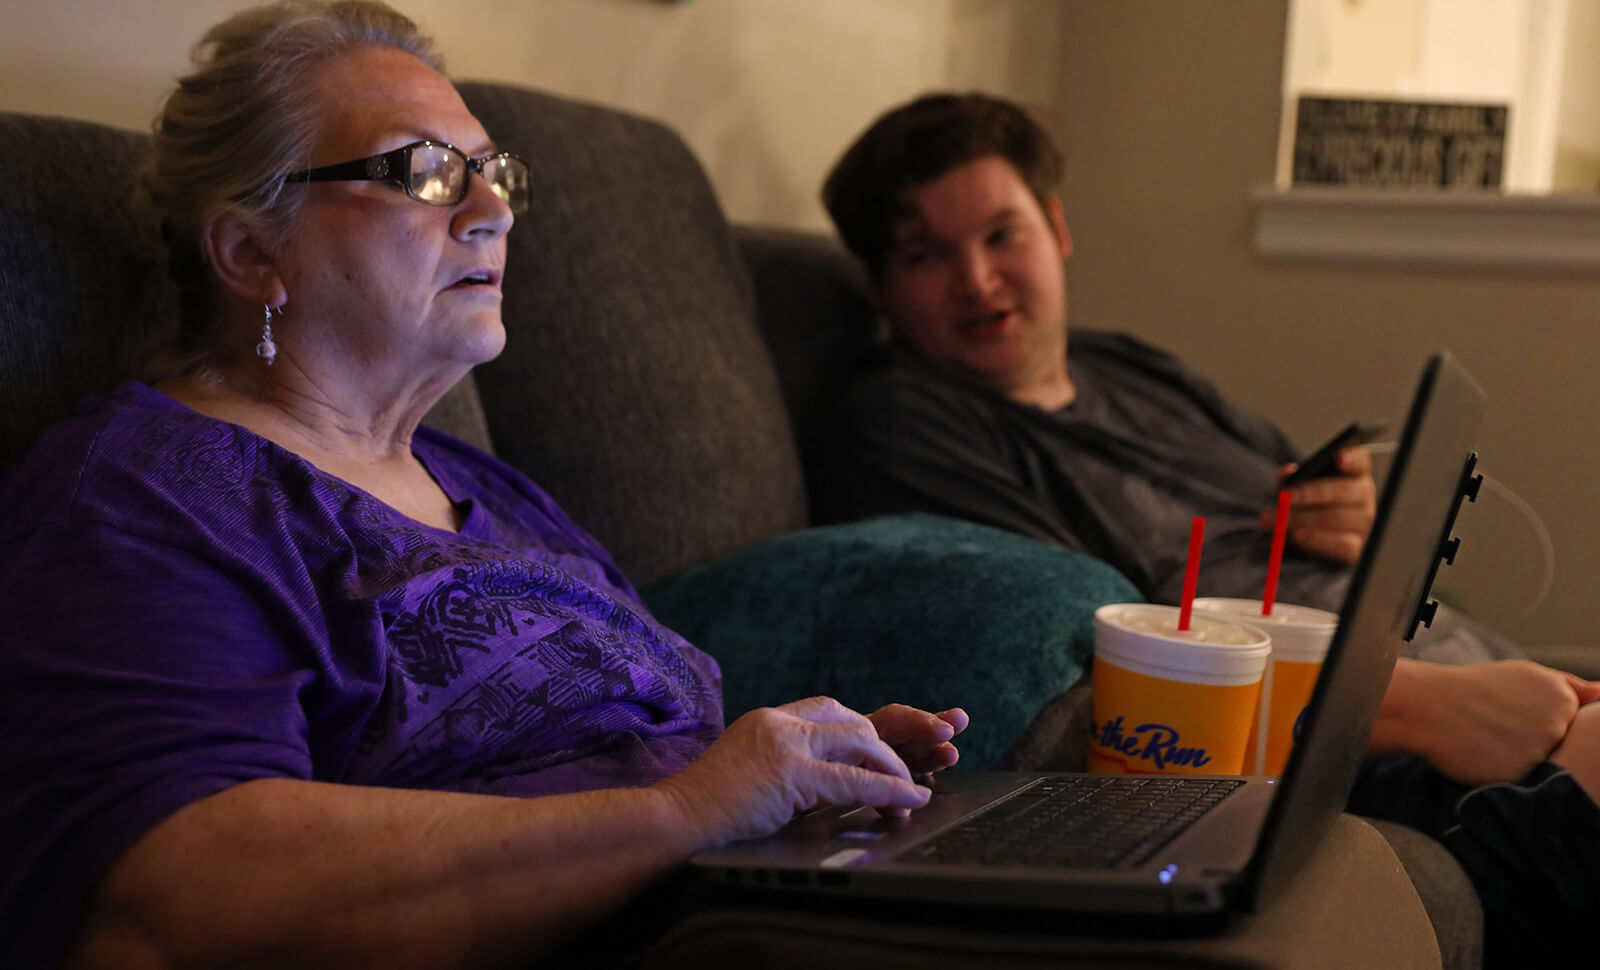 Lonni and Dan Schicker work out a computer issue in the apartment they share in Fenton on Monday, July 30, 2018. Lonni, who has dementia, says she worries that Dan is caring for her out of guilt.